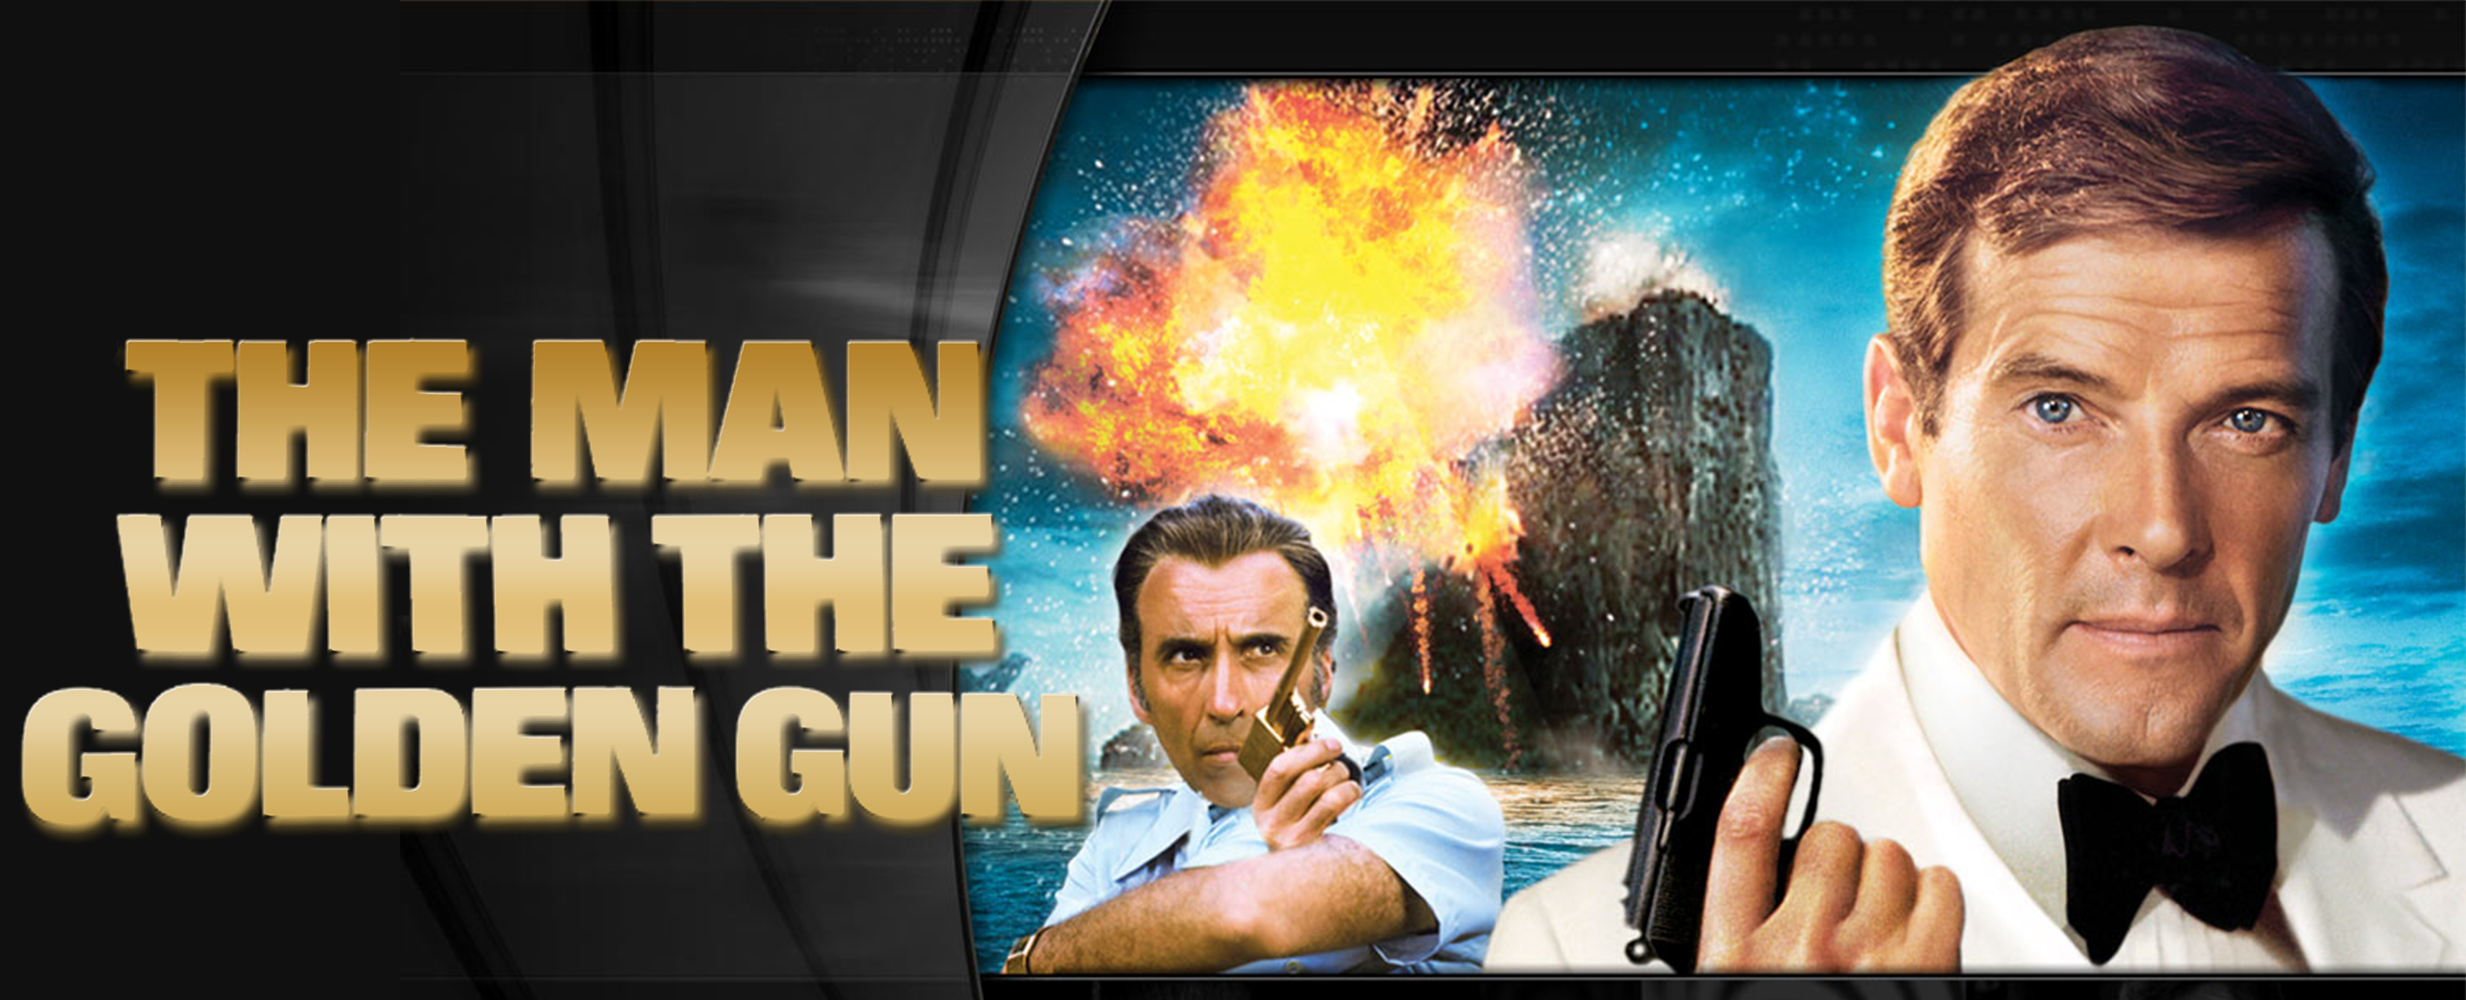 Man With the Golden Gun - Darren's Movie and Book Reviews